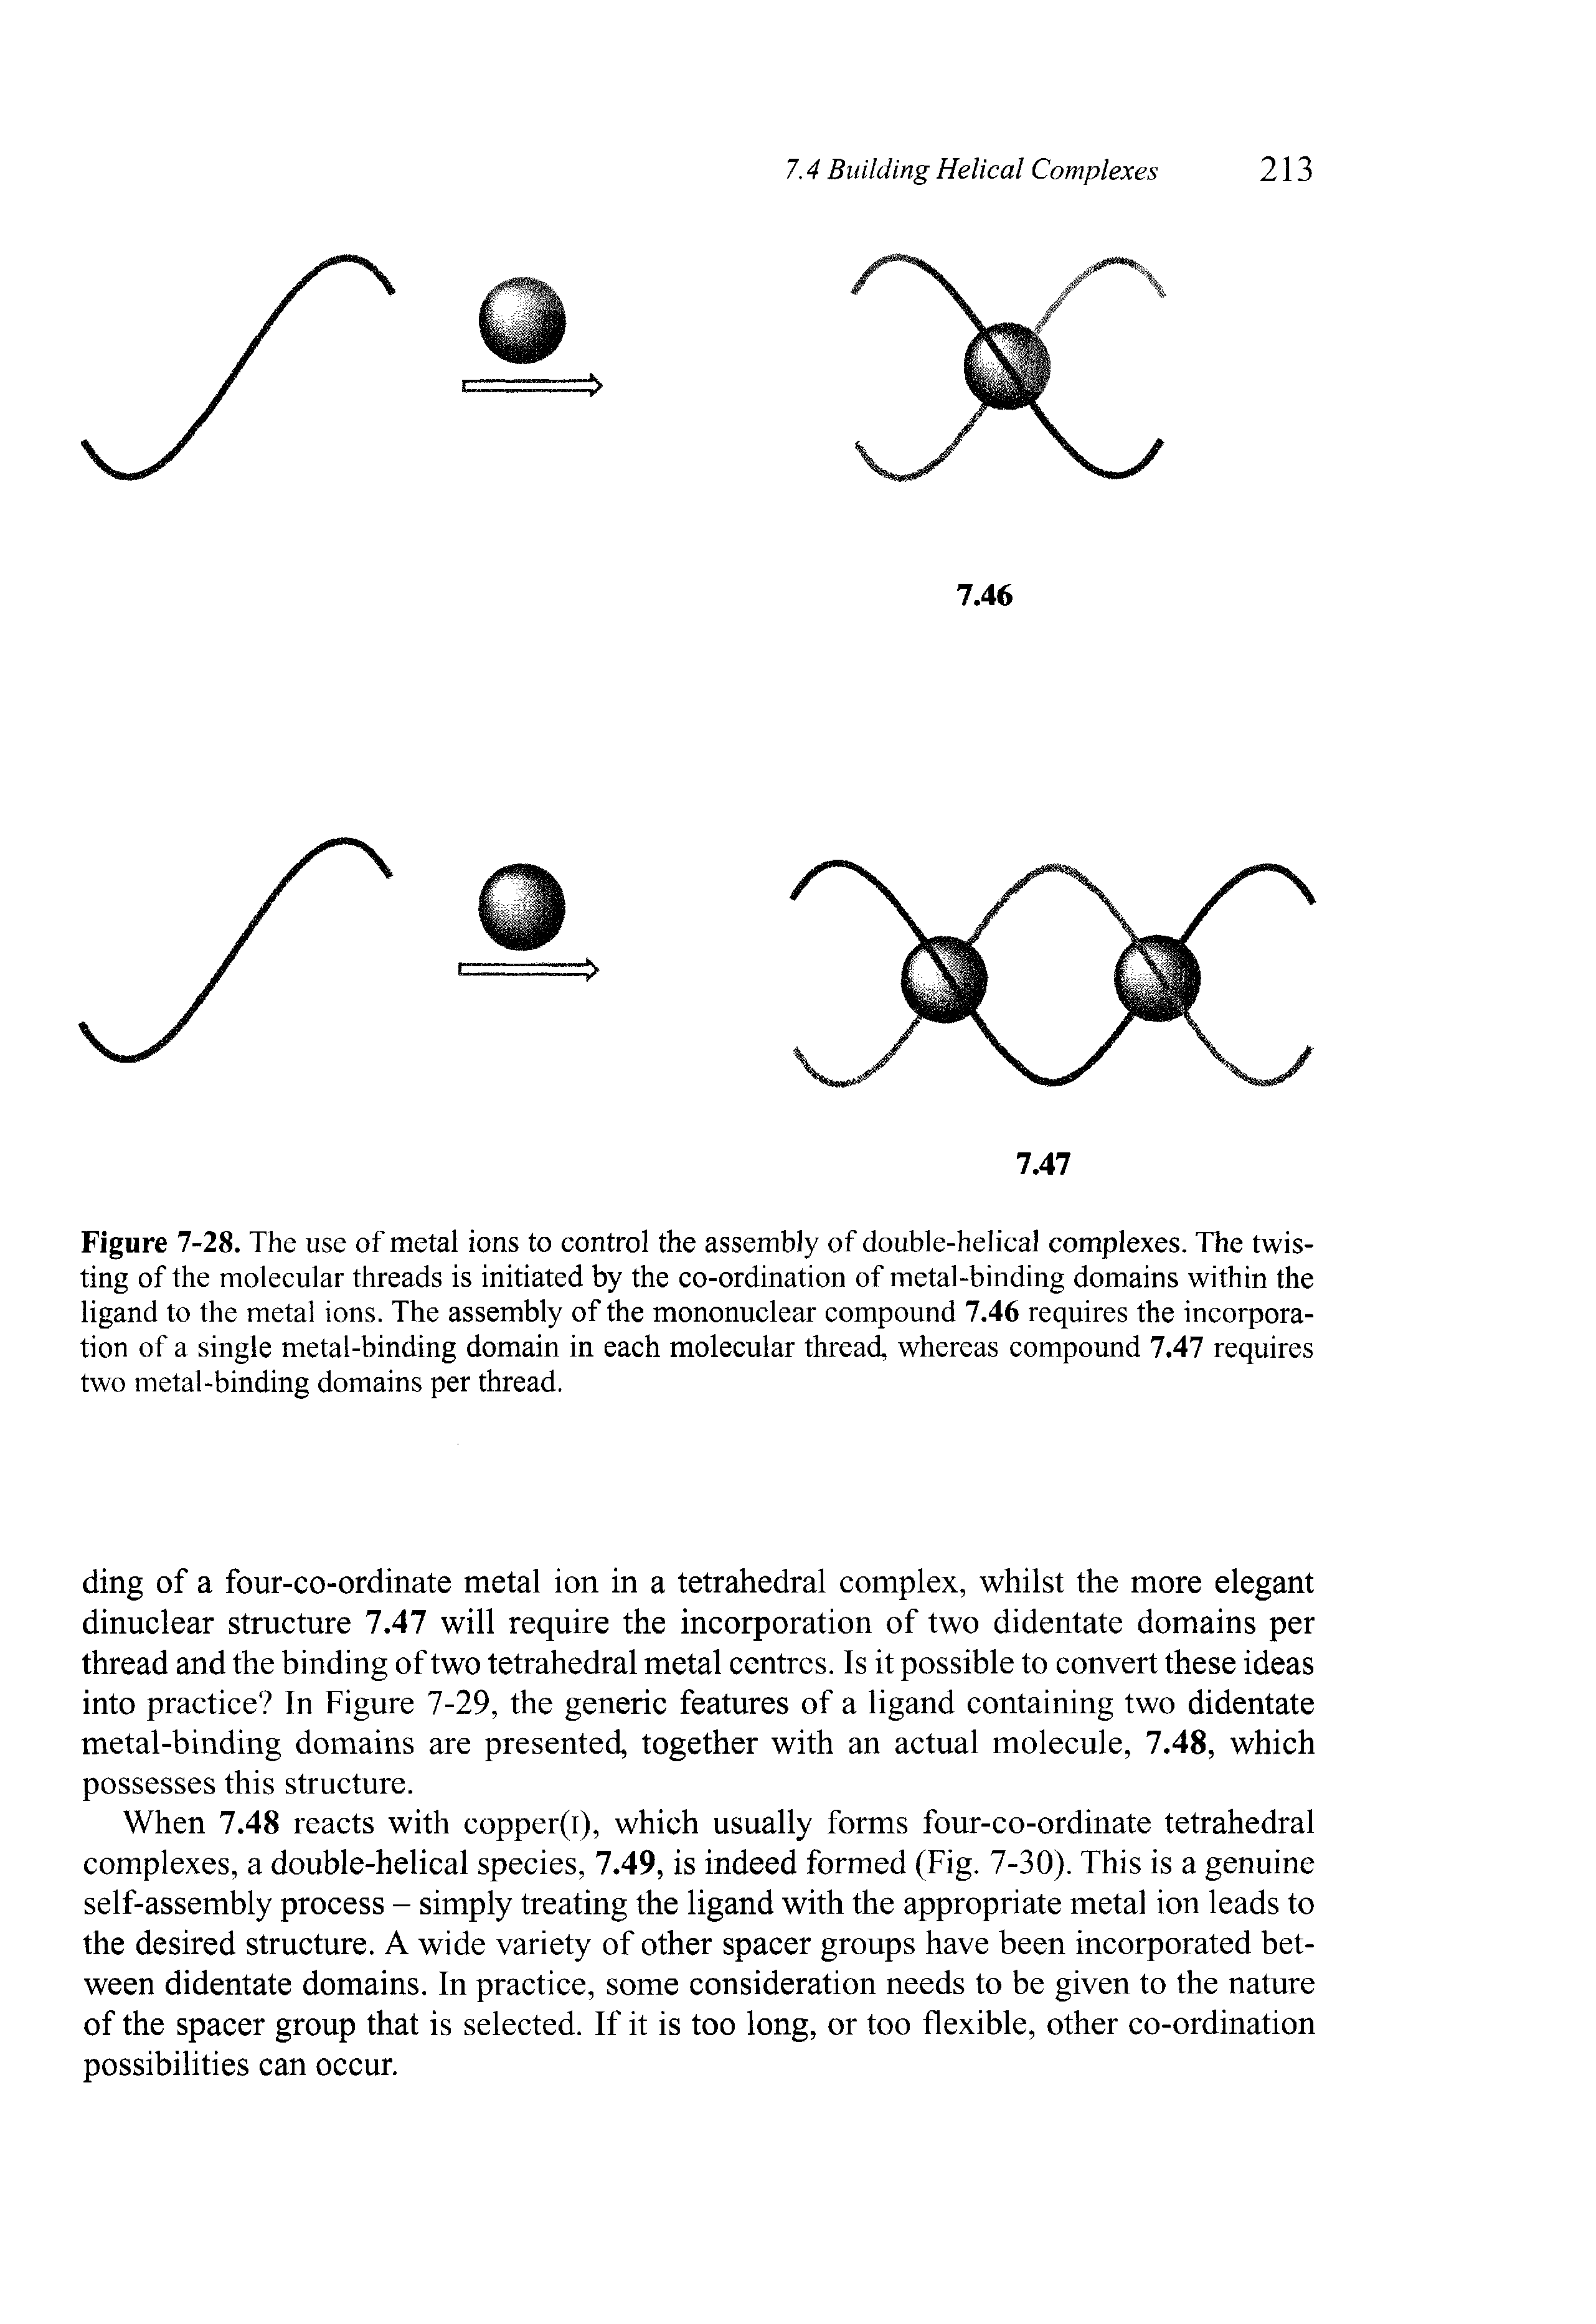 Figure 7-28. The use of metal ions to control the assembly of double-helical complexes. The twisting of the molecular threads is initiated by the co-ordination of metal-binding domains within the ligand to the metal ions. The assembly of the mononuclear compound 7.46 requires the incorporation of a single metal-binding domain in each molecular thread, whereas compound 7.47 requires two metal-binding domains per thread.